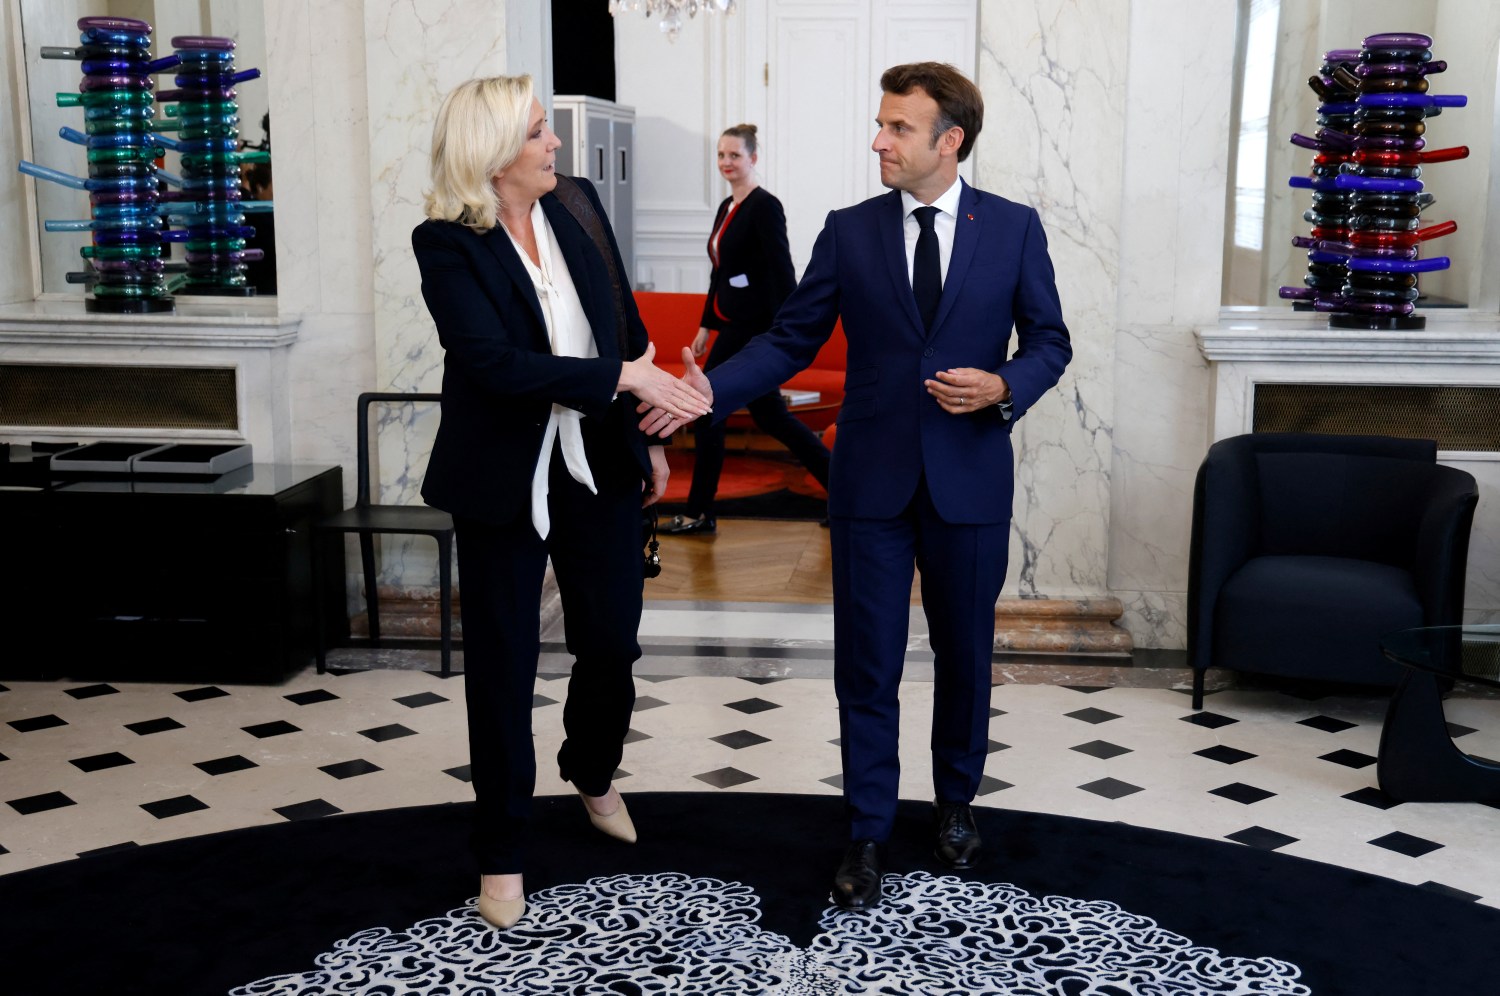 French far-right Rassemblement National (RN) leader and Member of Parliament Marine Le Pen is escorted by France's President Emmanuel Macron after talks at the presidential Elysee Palace, France, June 21, 2022. Ludovic Marin/Pool via REUTERS